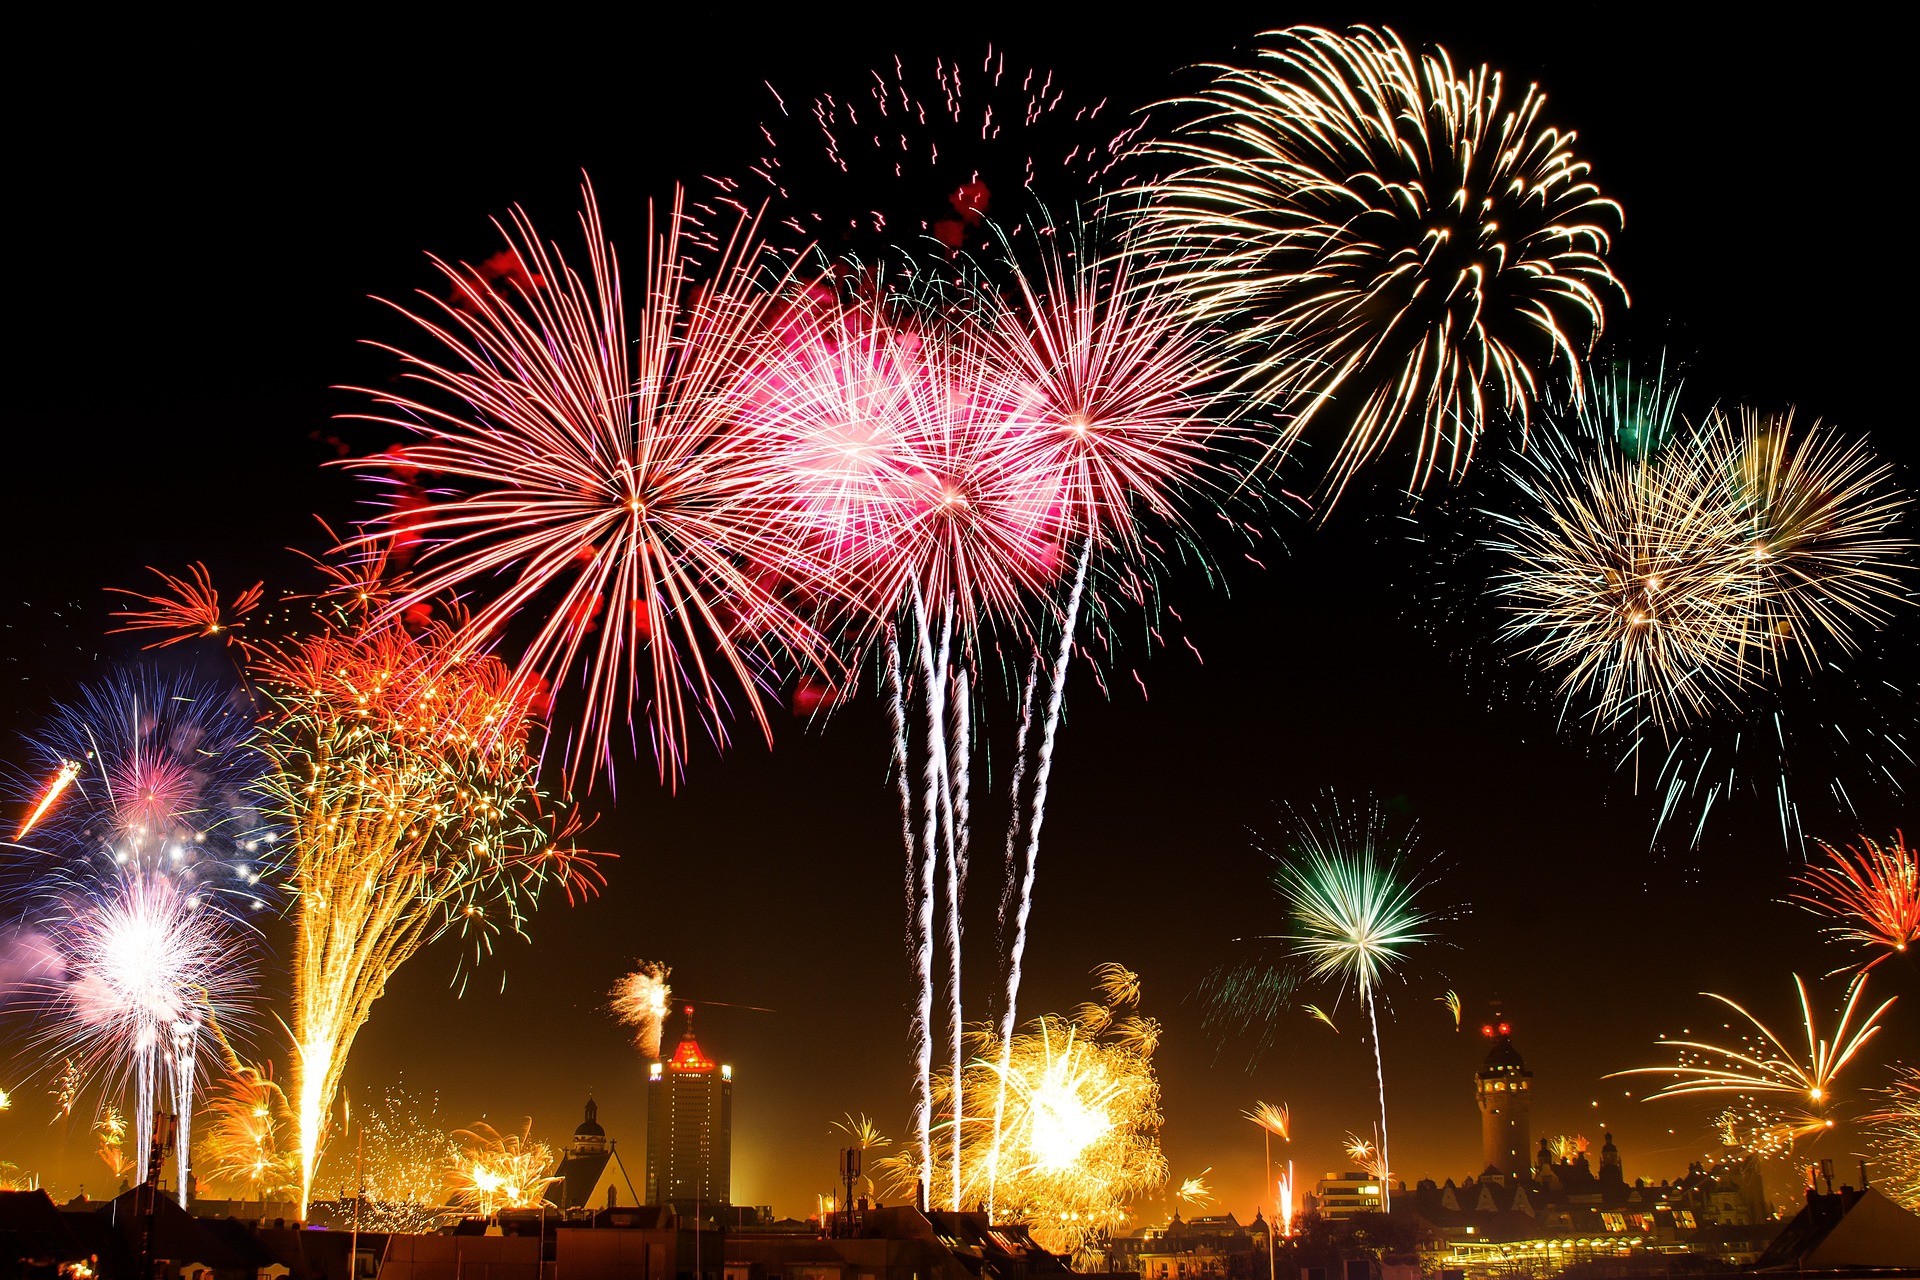 Enjoy fireworks this 4th of July in Austin